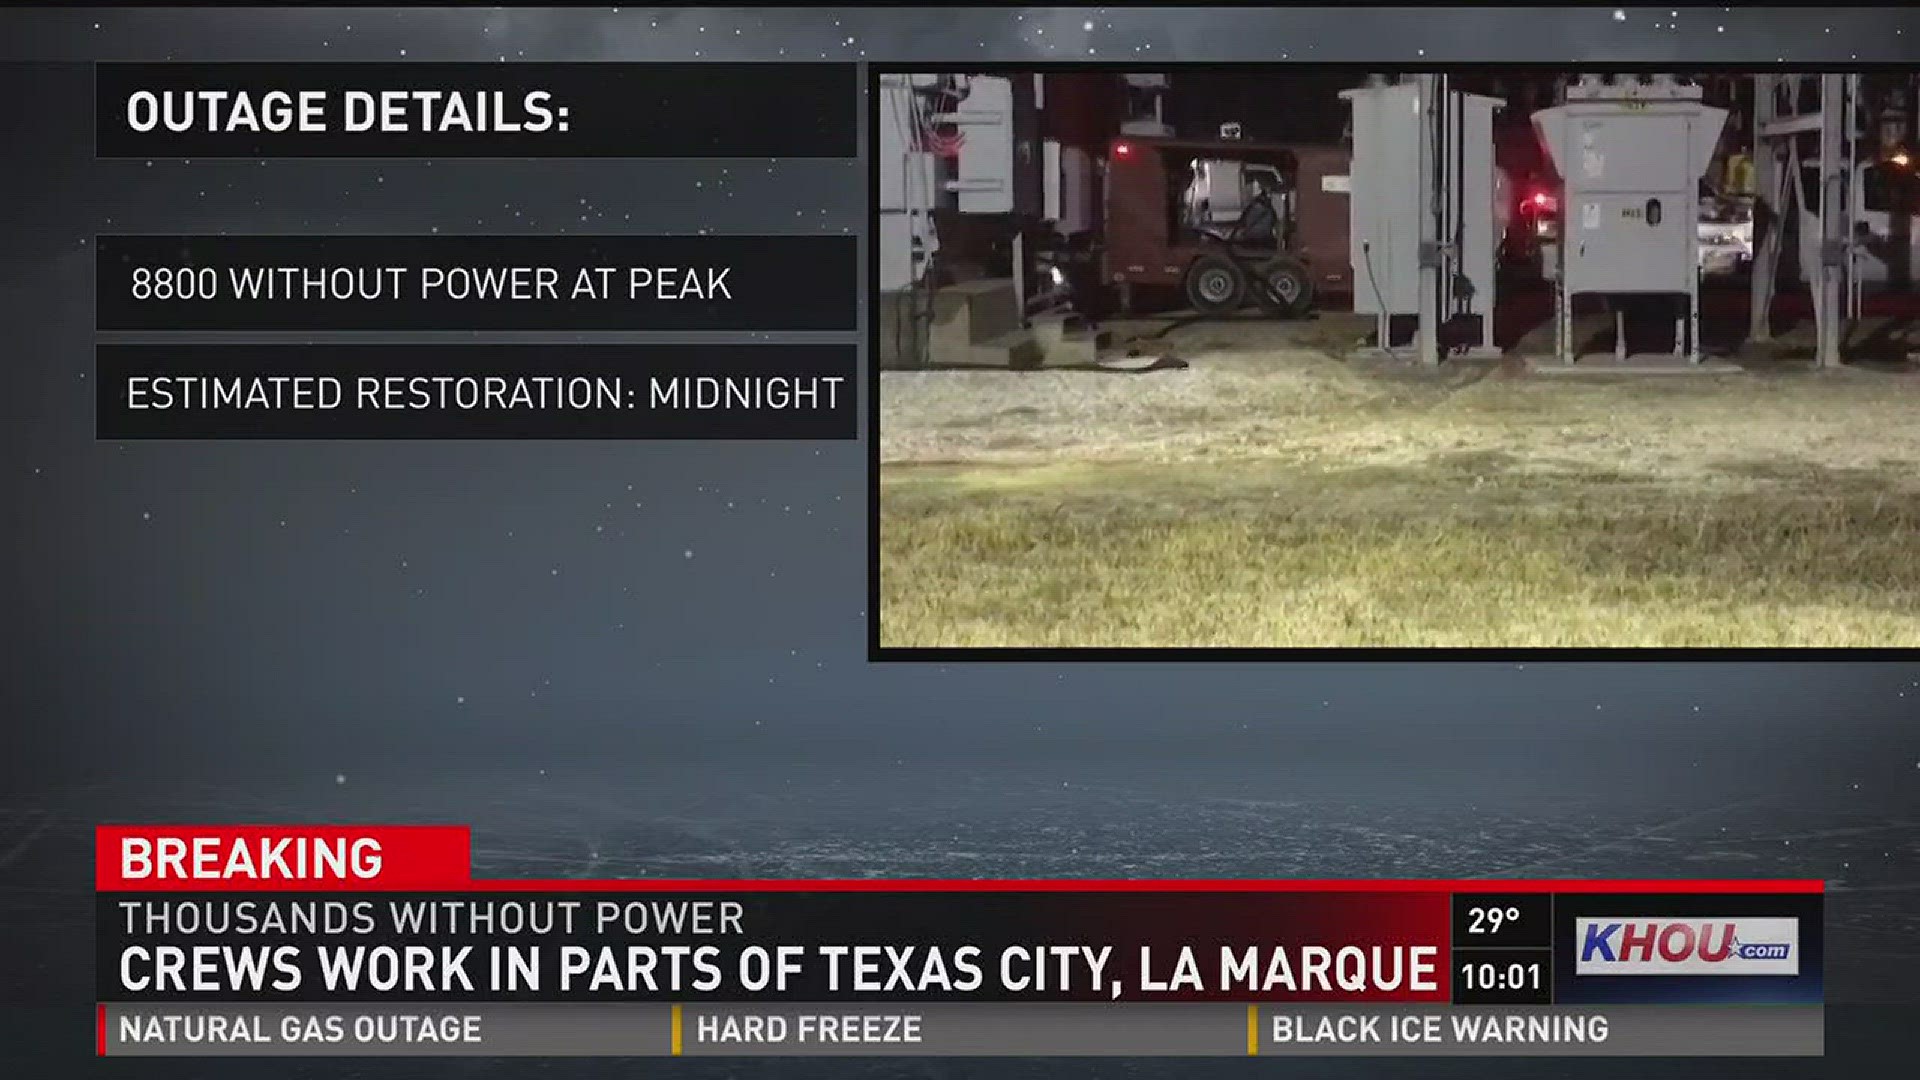 A large power outage has been reported in Texas City and La Marque on Wednesday evening.